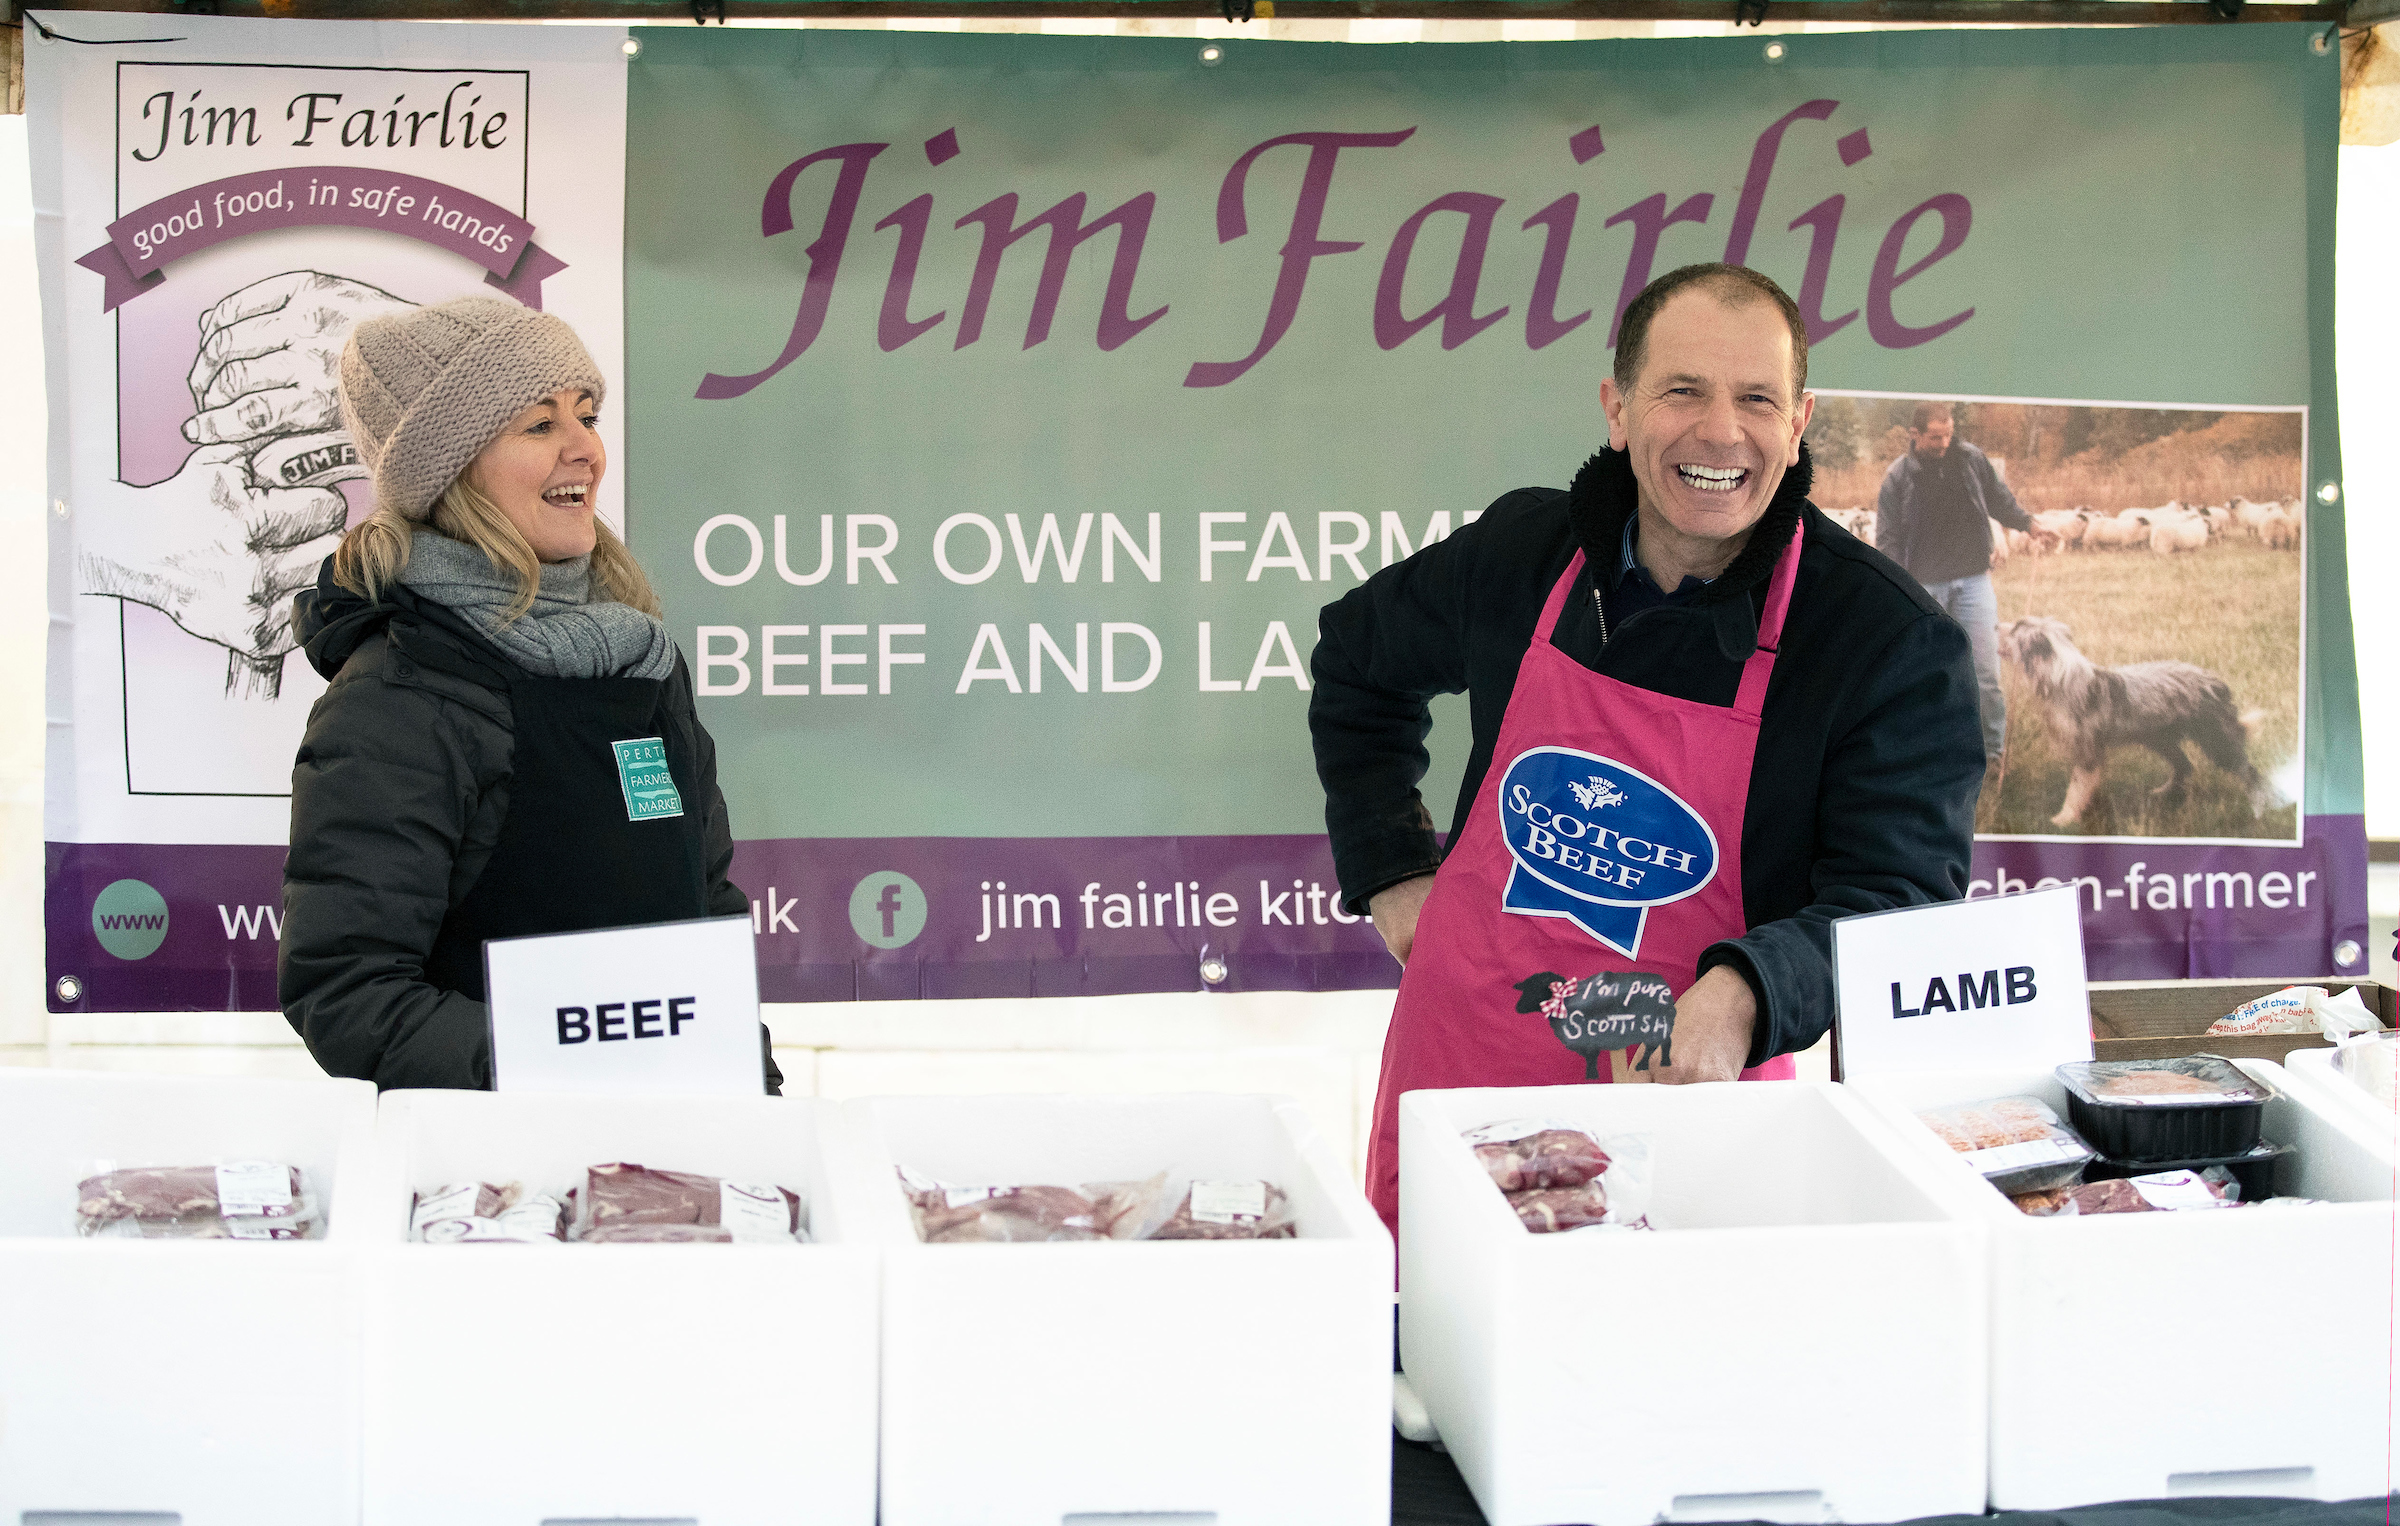 Perth Farmers Market founder Jim Fairlie with his wife Anne McGhee